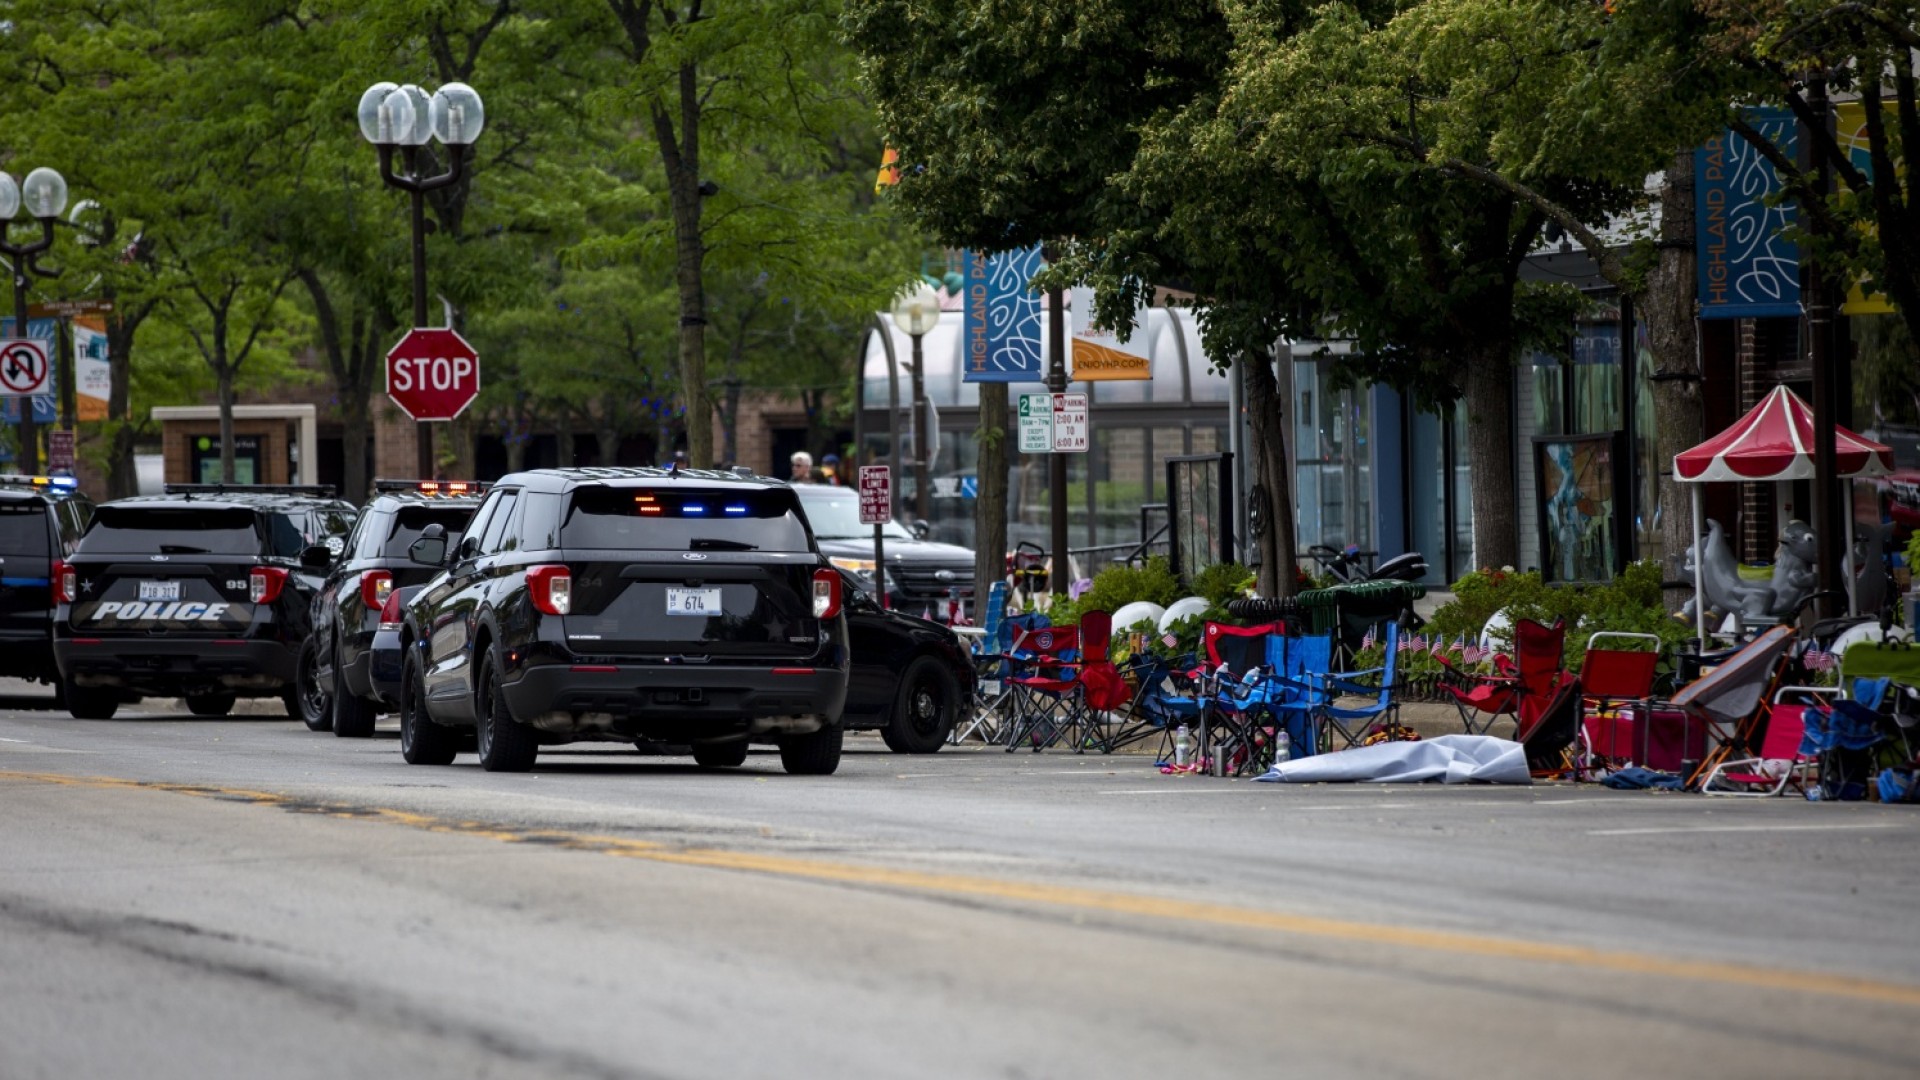 At least 6 dead, 24 injured after gunman fires into crowd gathered for July Fourth parade